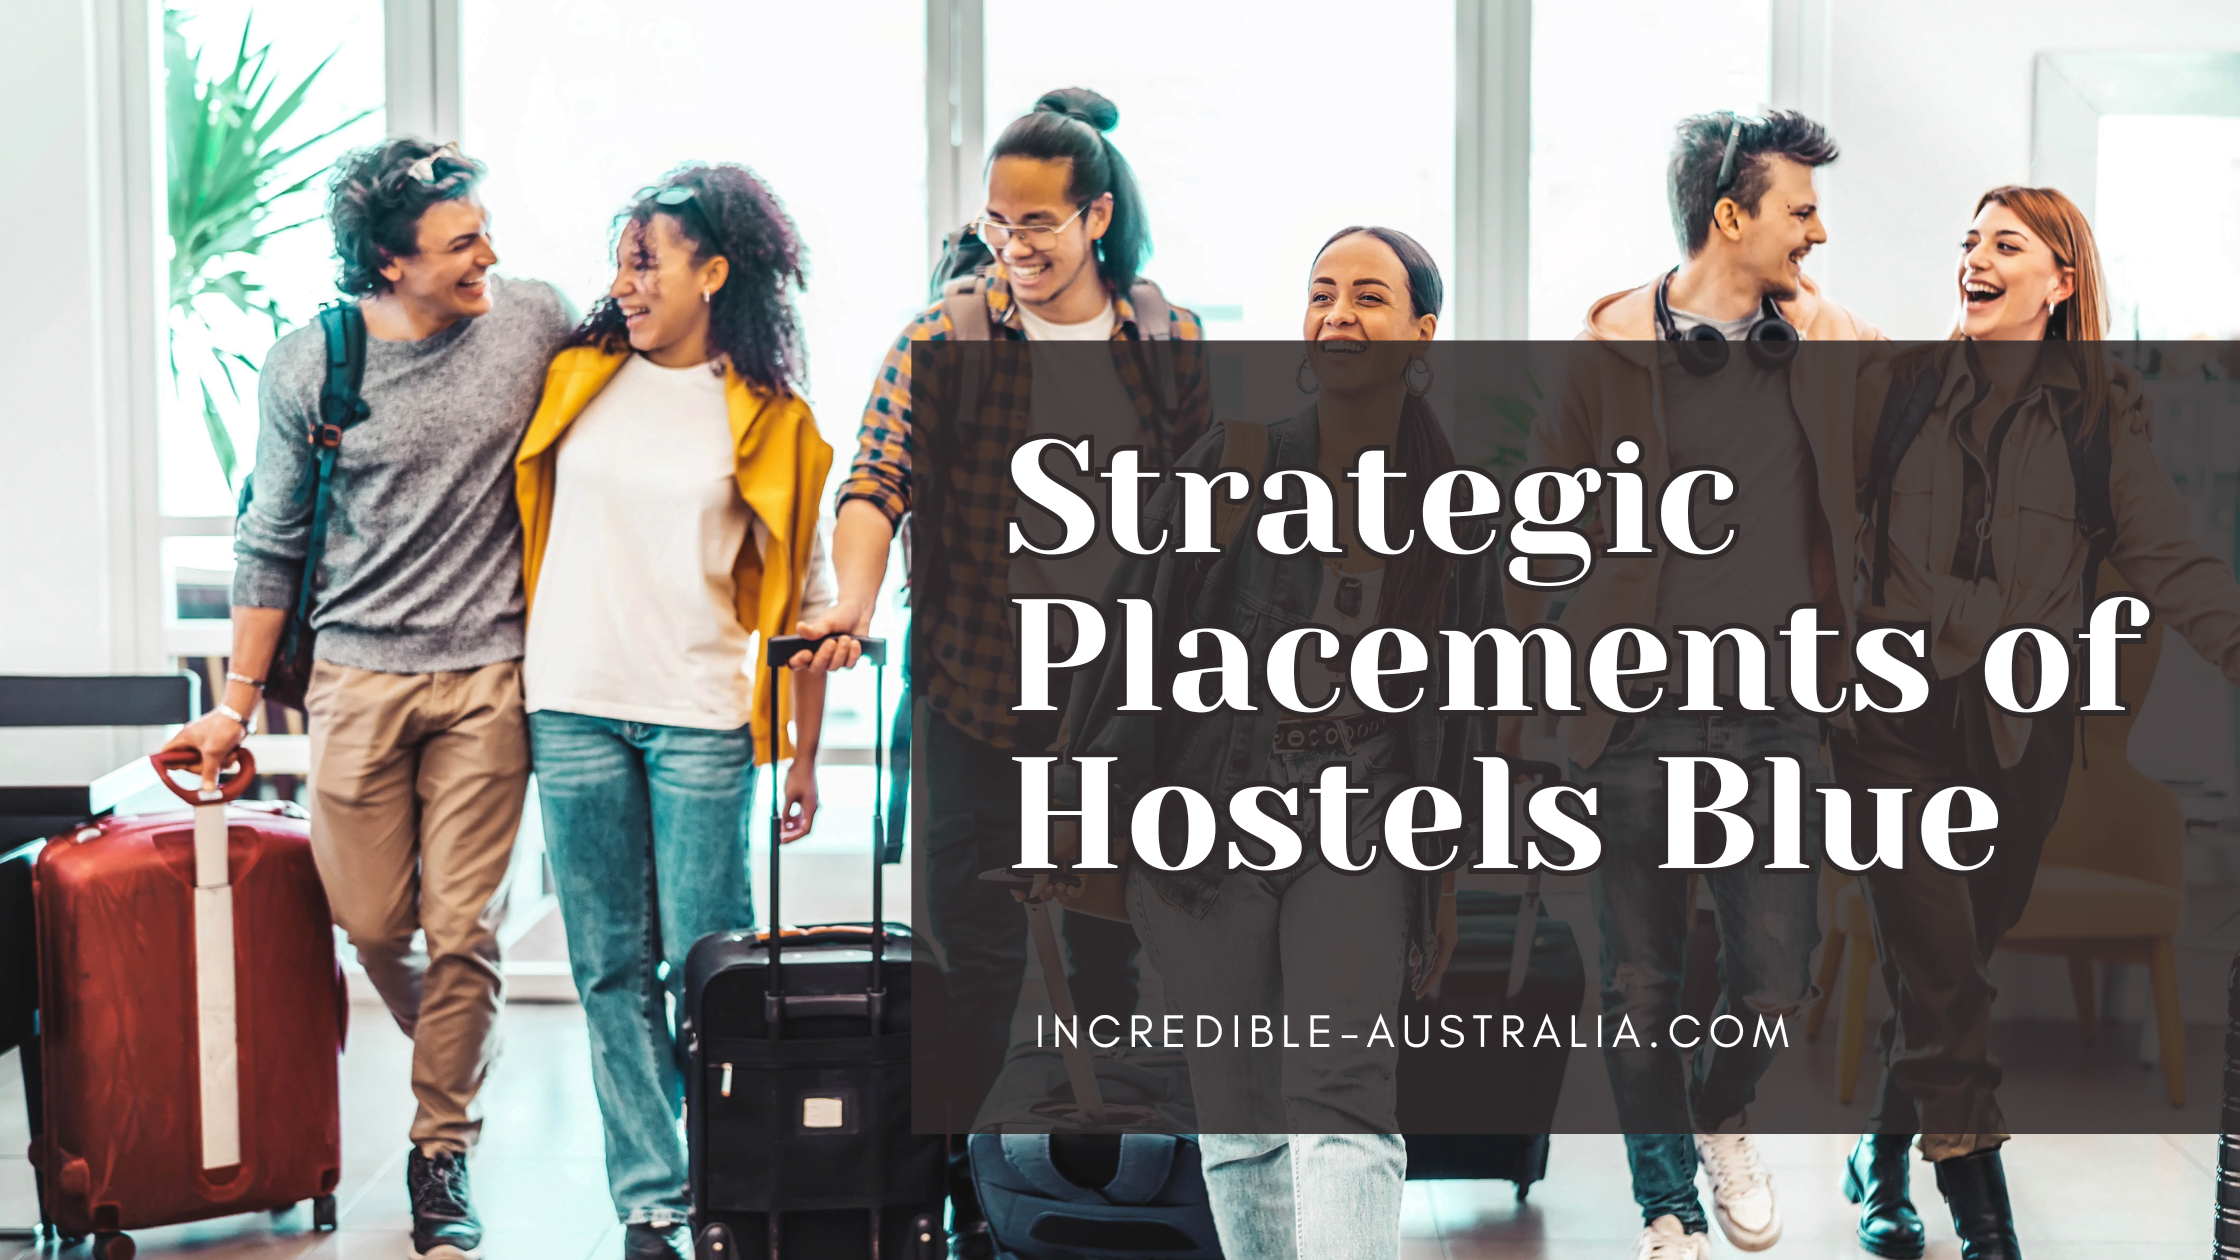 The Strategic Placements of Hostels Blue